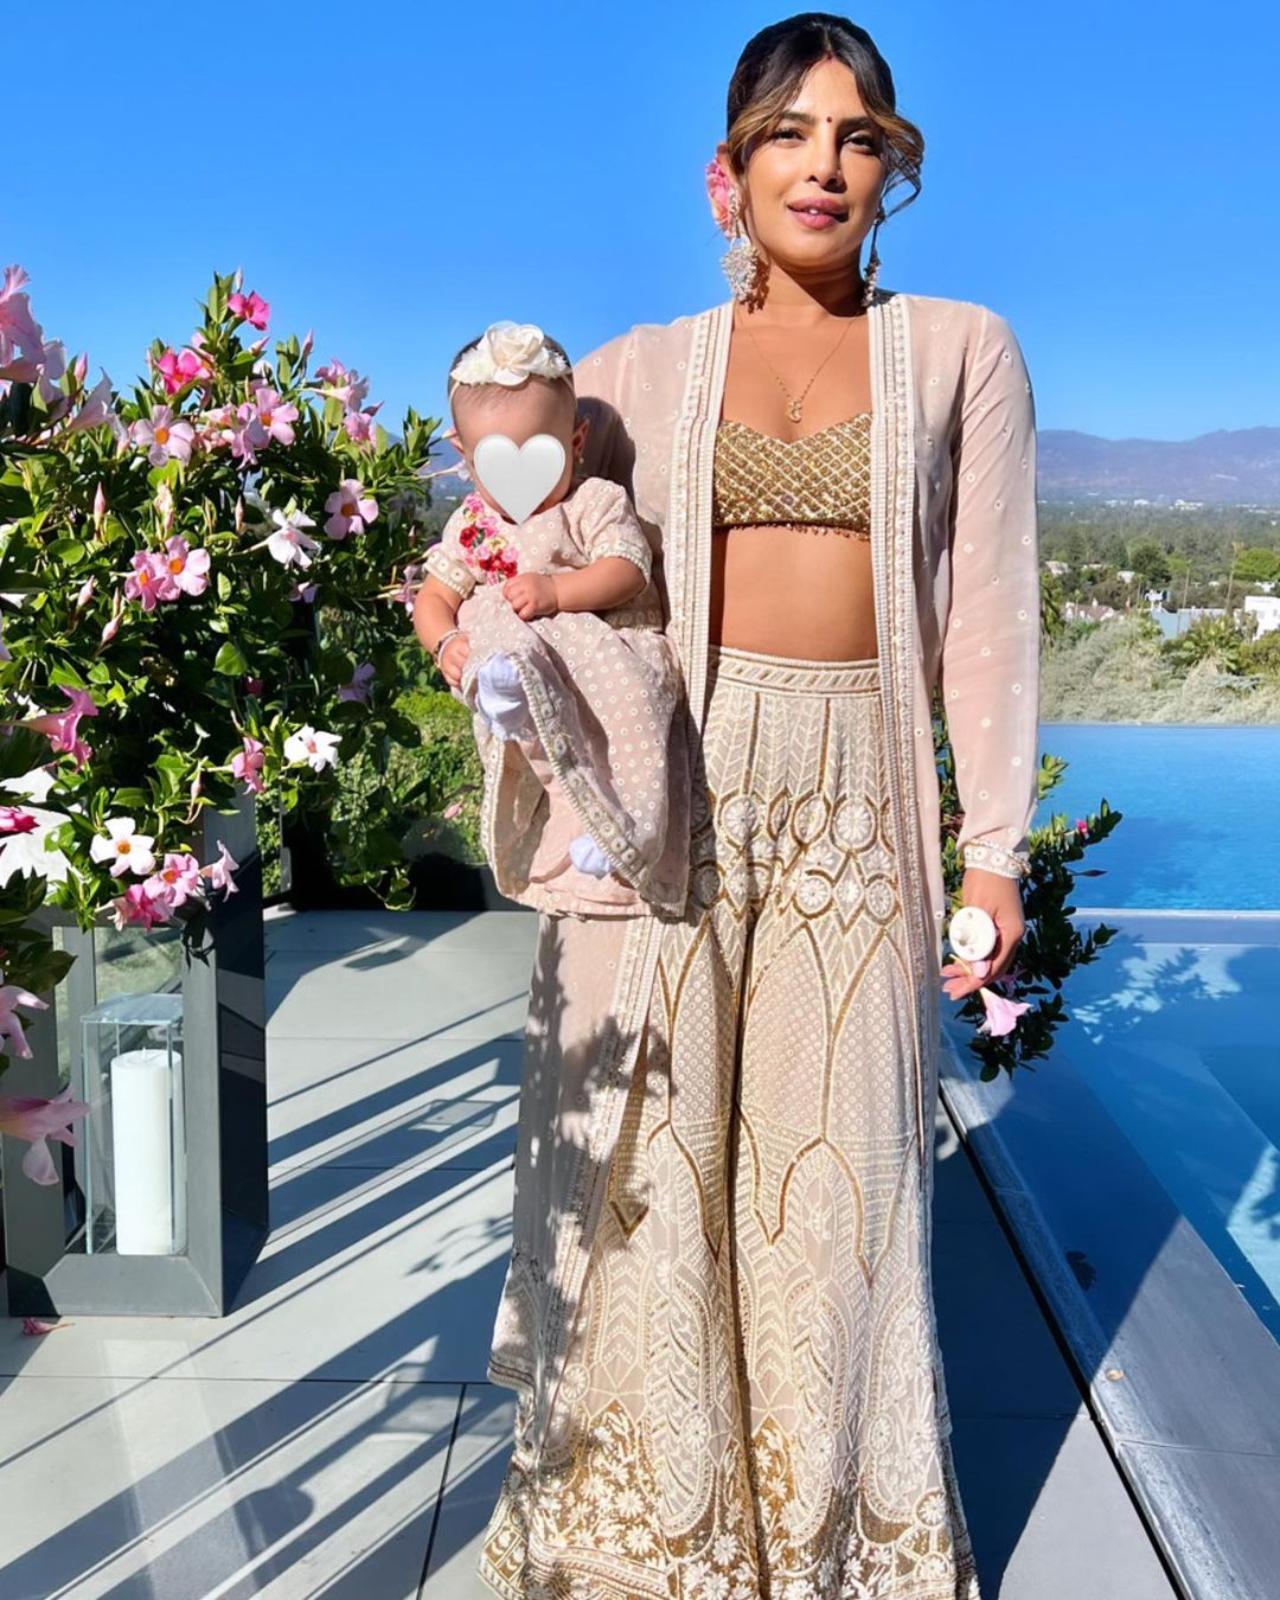 Priyanka also shared a picture of her holding her little one while posing by the pool side. For the festivities, the family twinned in ivory coloured traditional attires